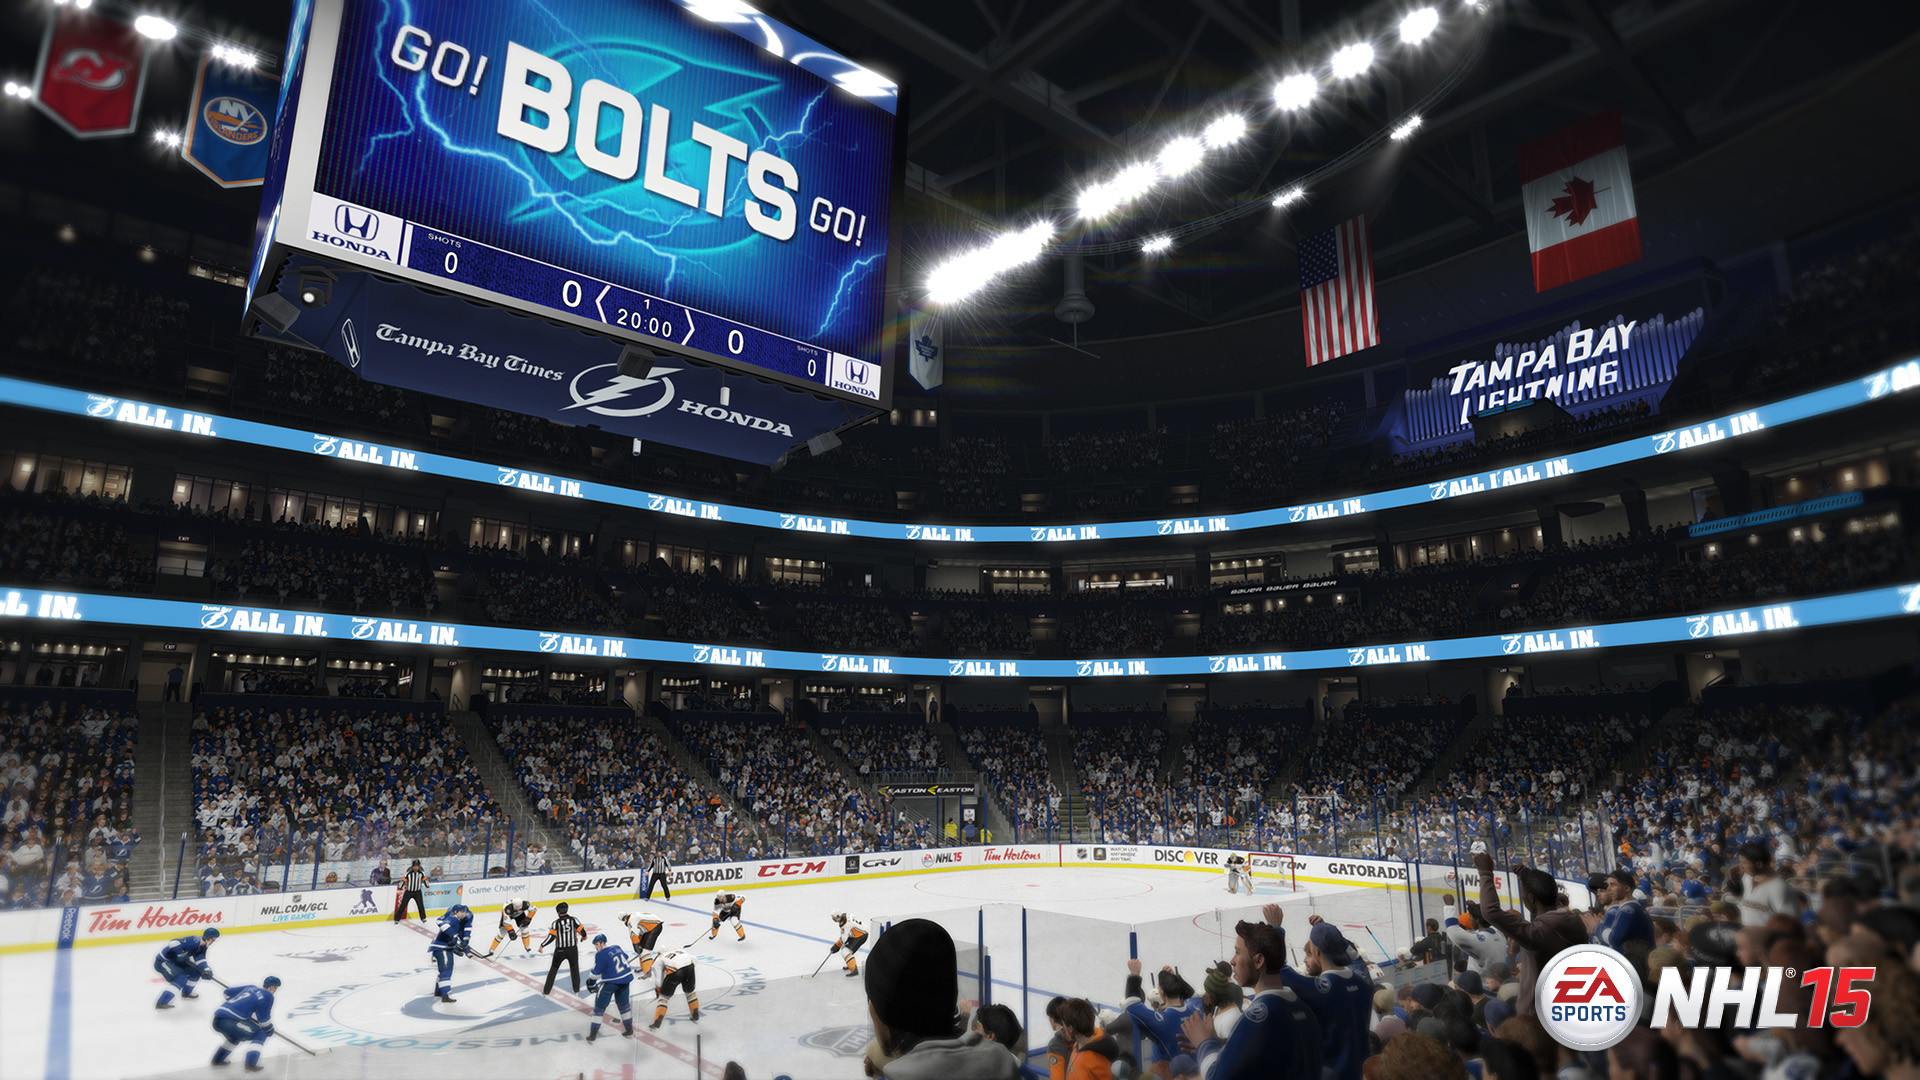 1920x1080 The TB Times Forum in NHL 15 ...